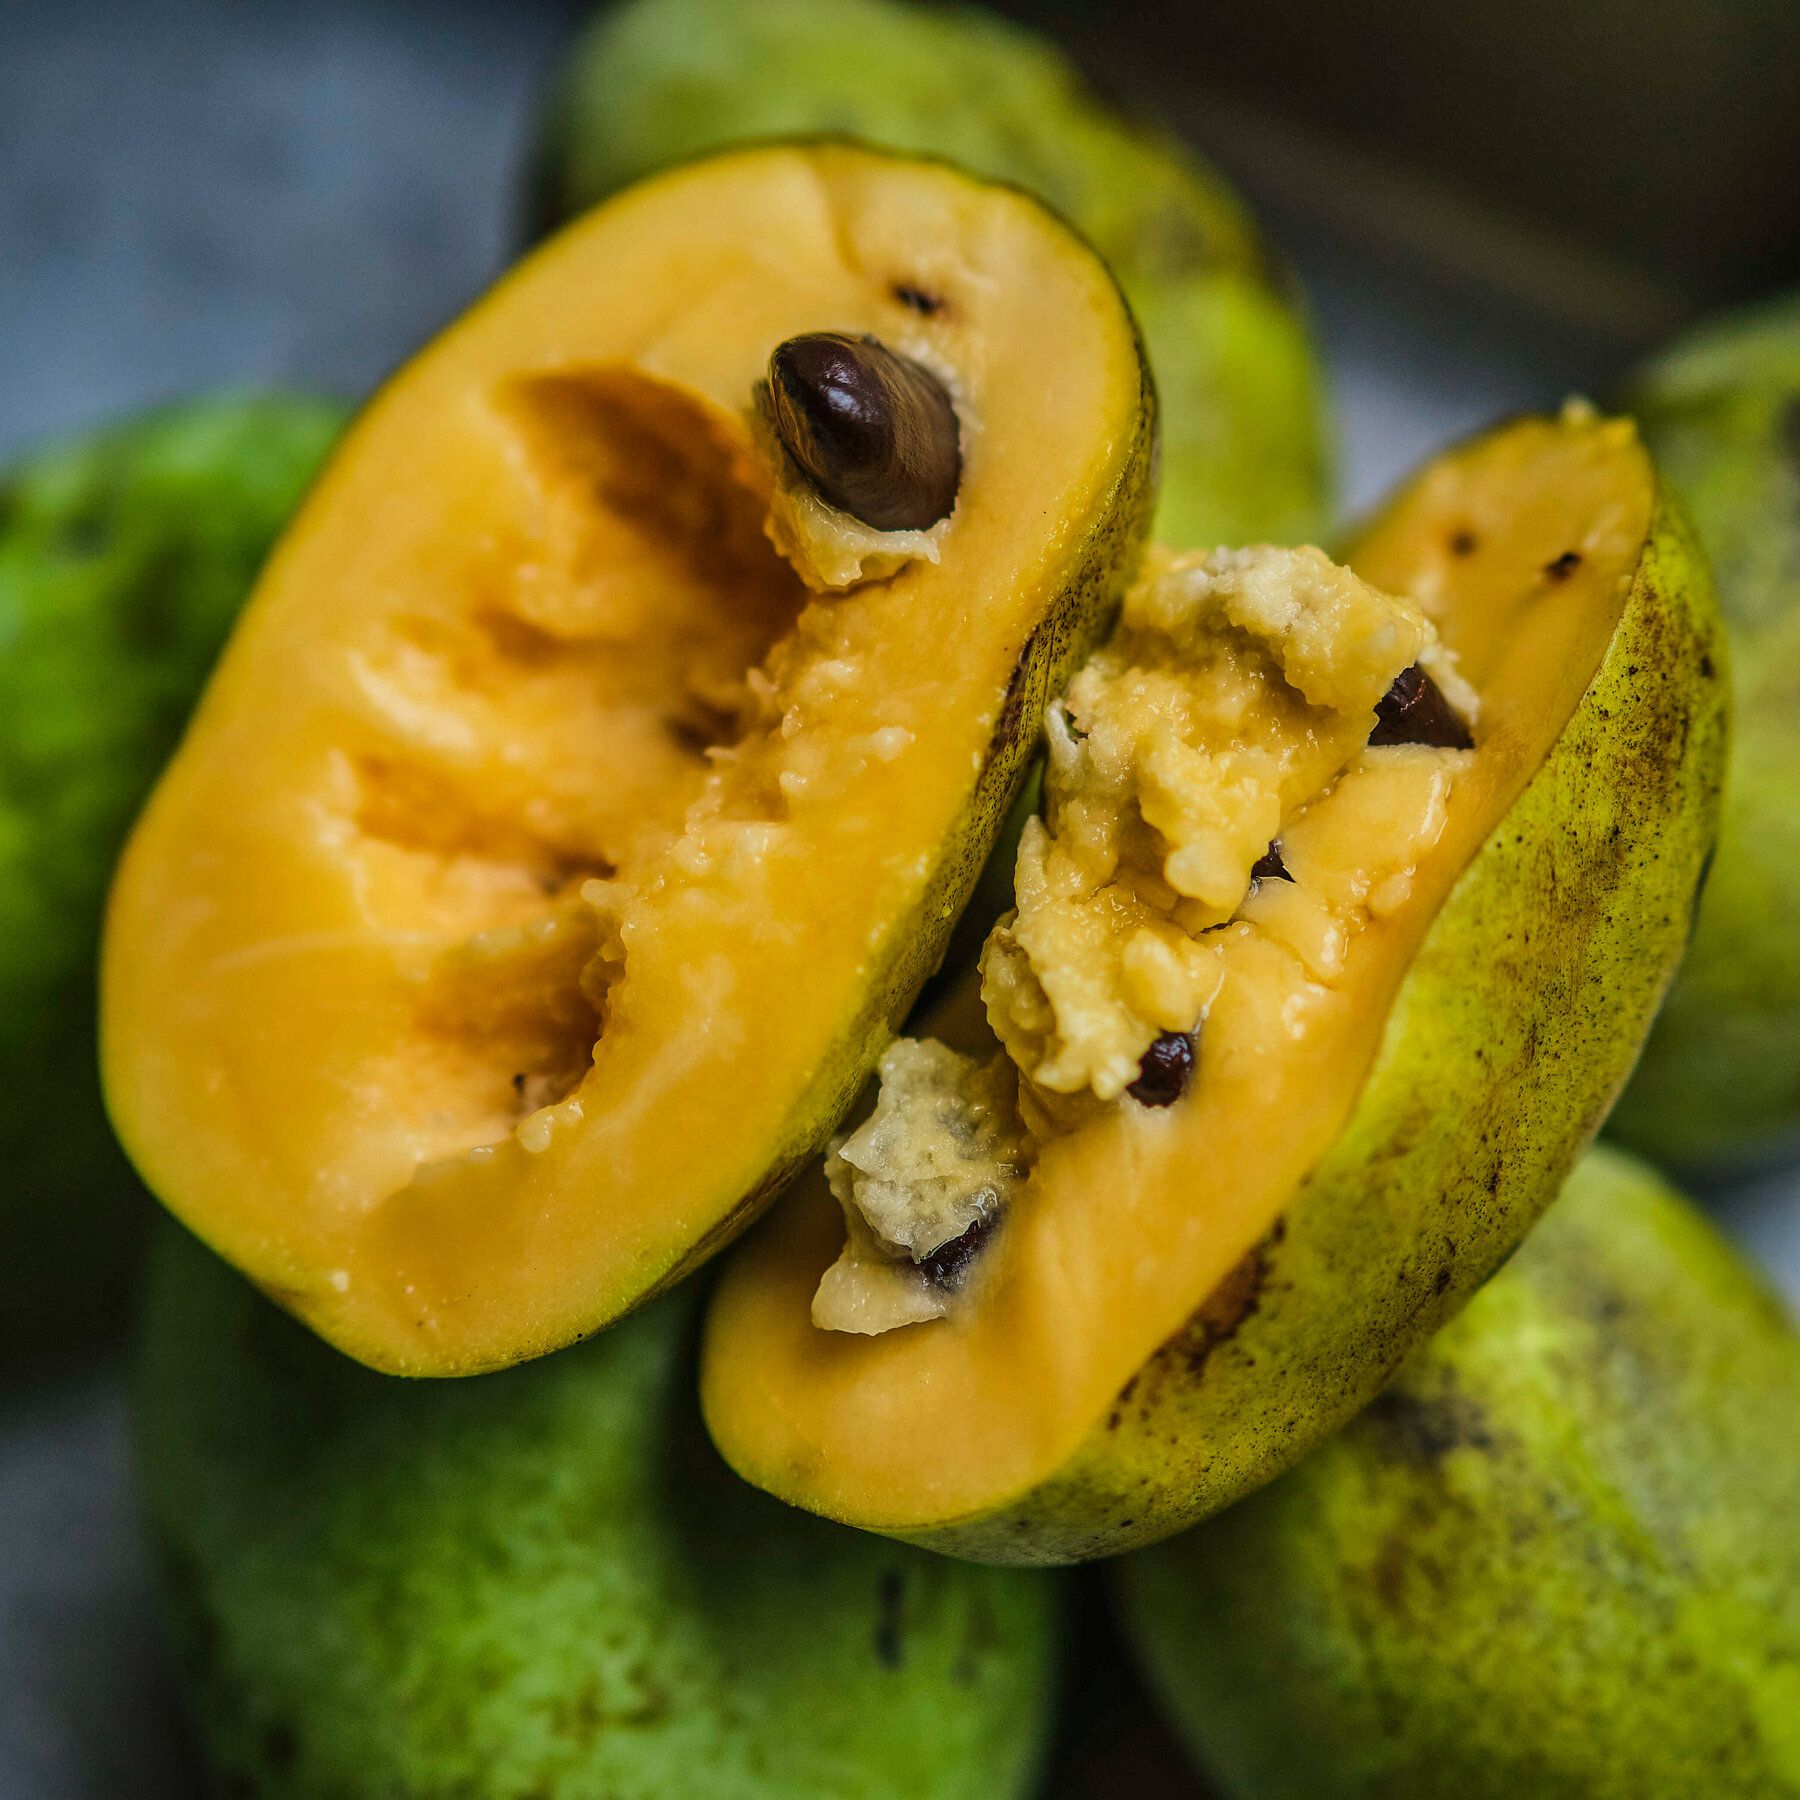 How to Grow (and Eat) a Pawpaw